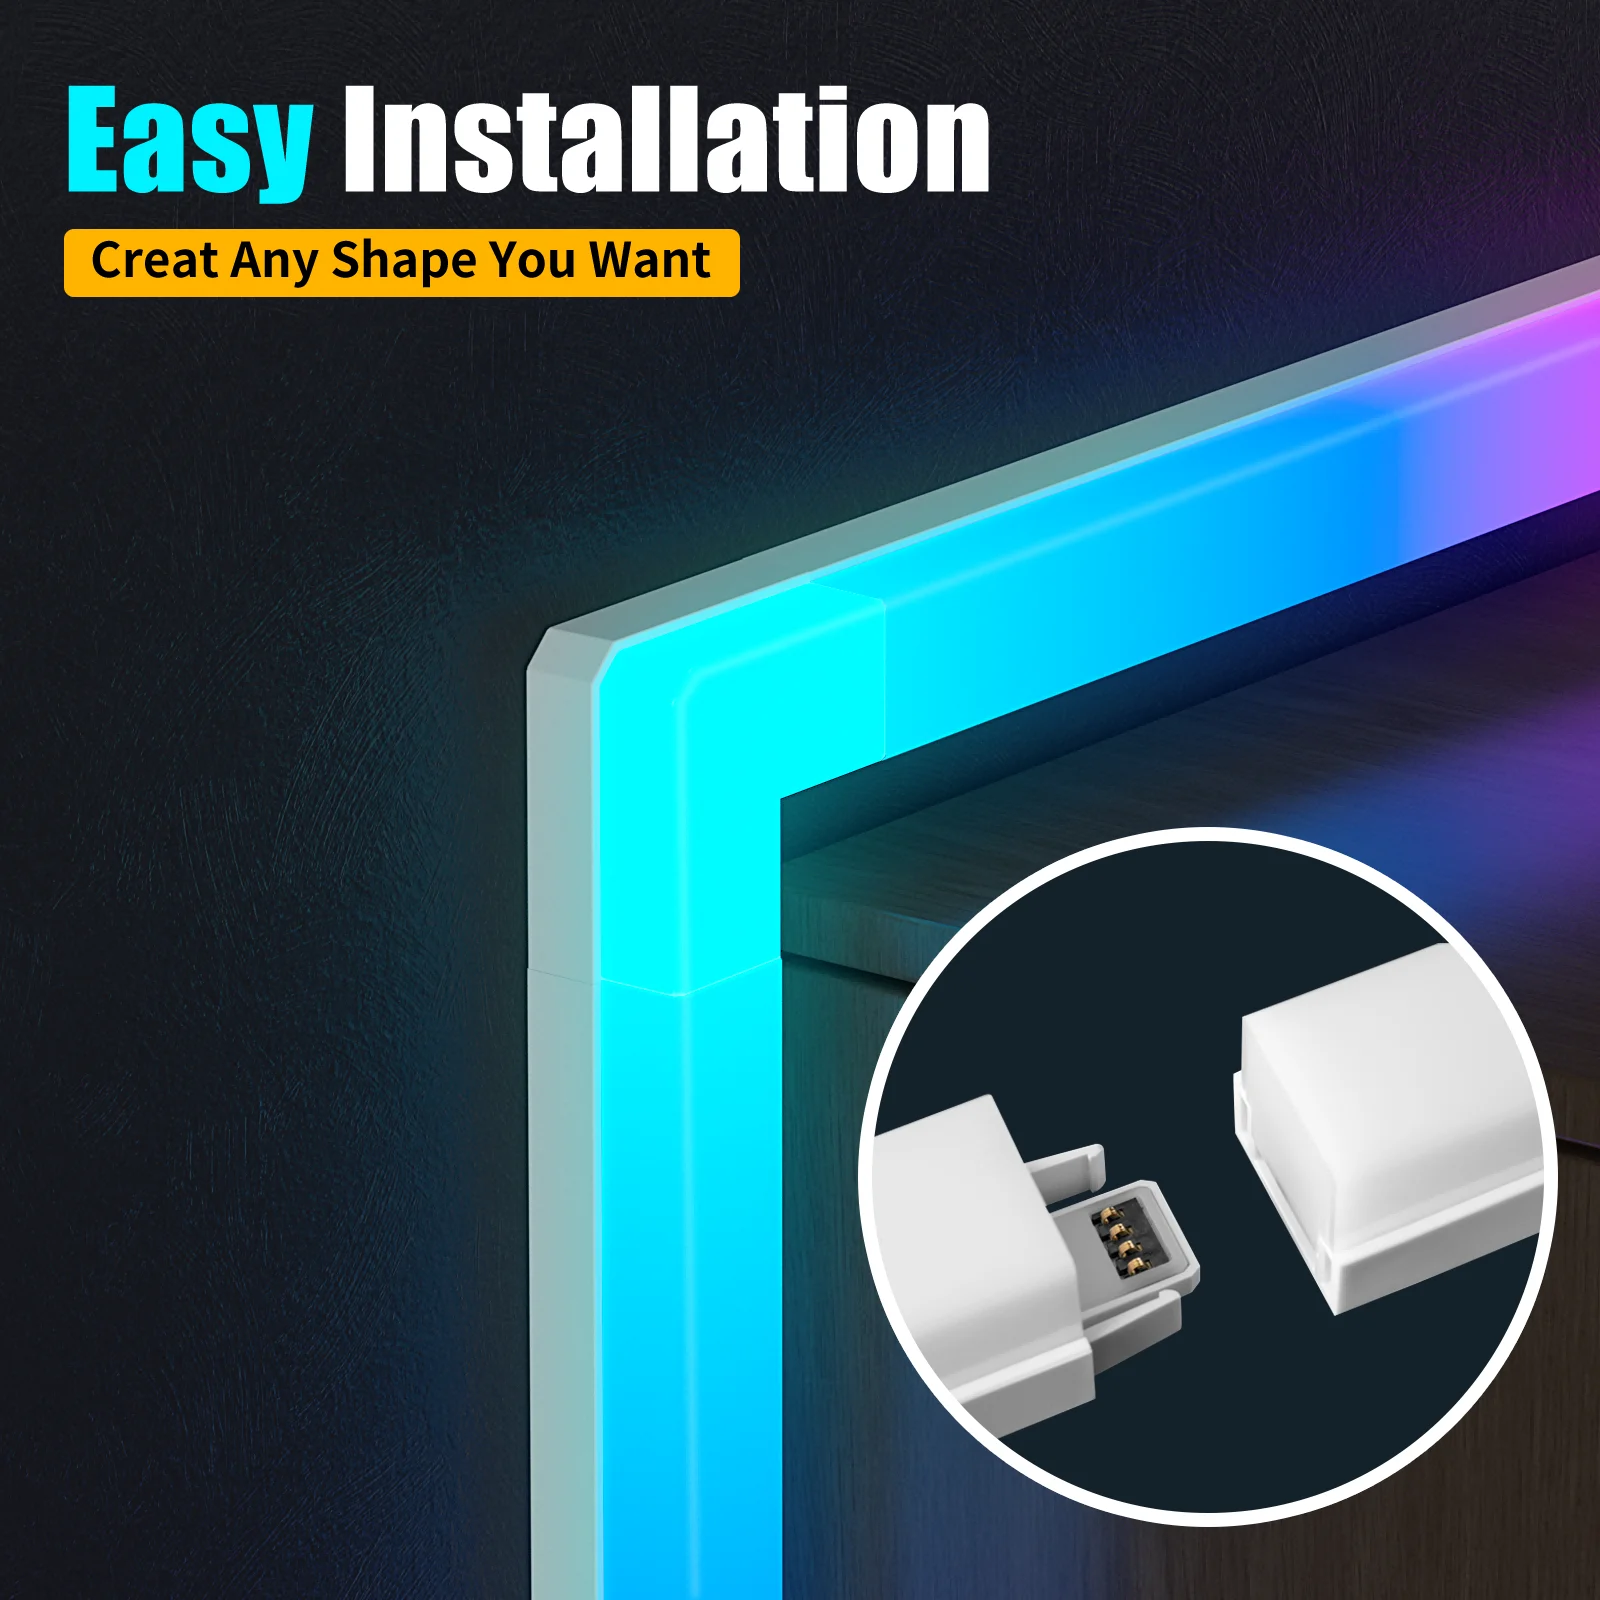 Uphere Smart Strip Lights With Multiple Dynamic Scenes Led Strip Light 5050  App Control Strip Led Light Bar Home Decoration Abs - Buy Wall Light,Led  Light,Led Wifi Wall Light Product on Alibaba.com